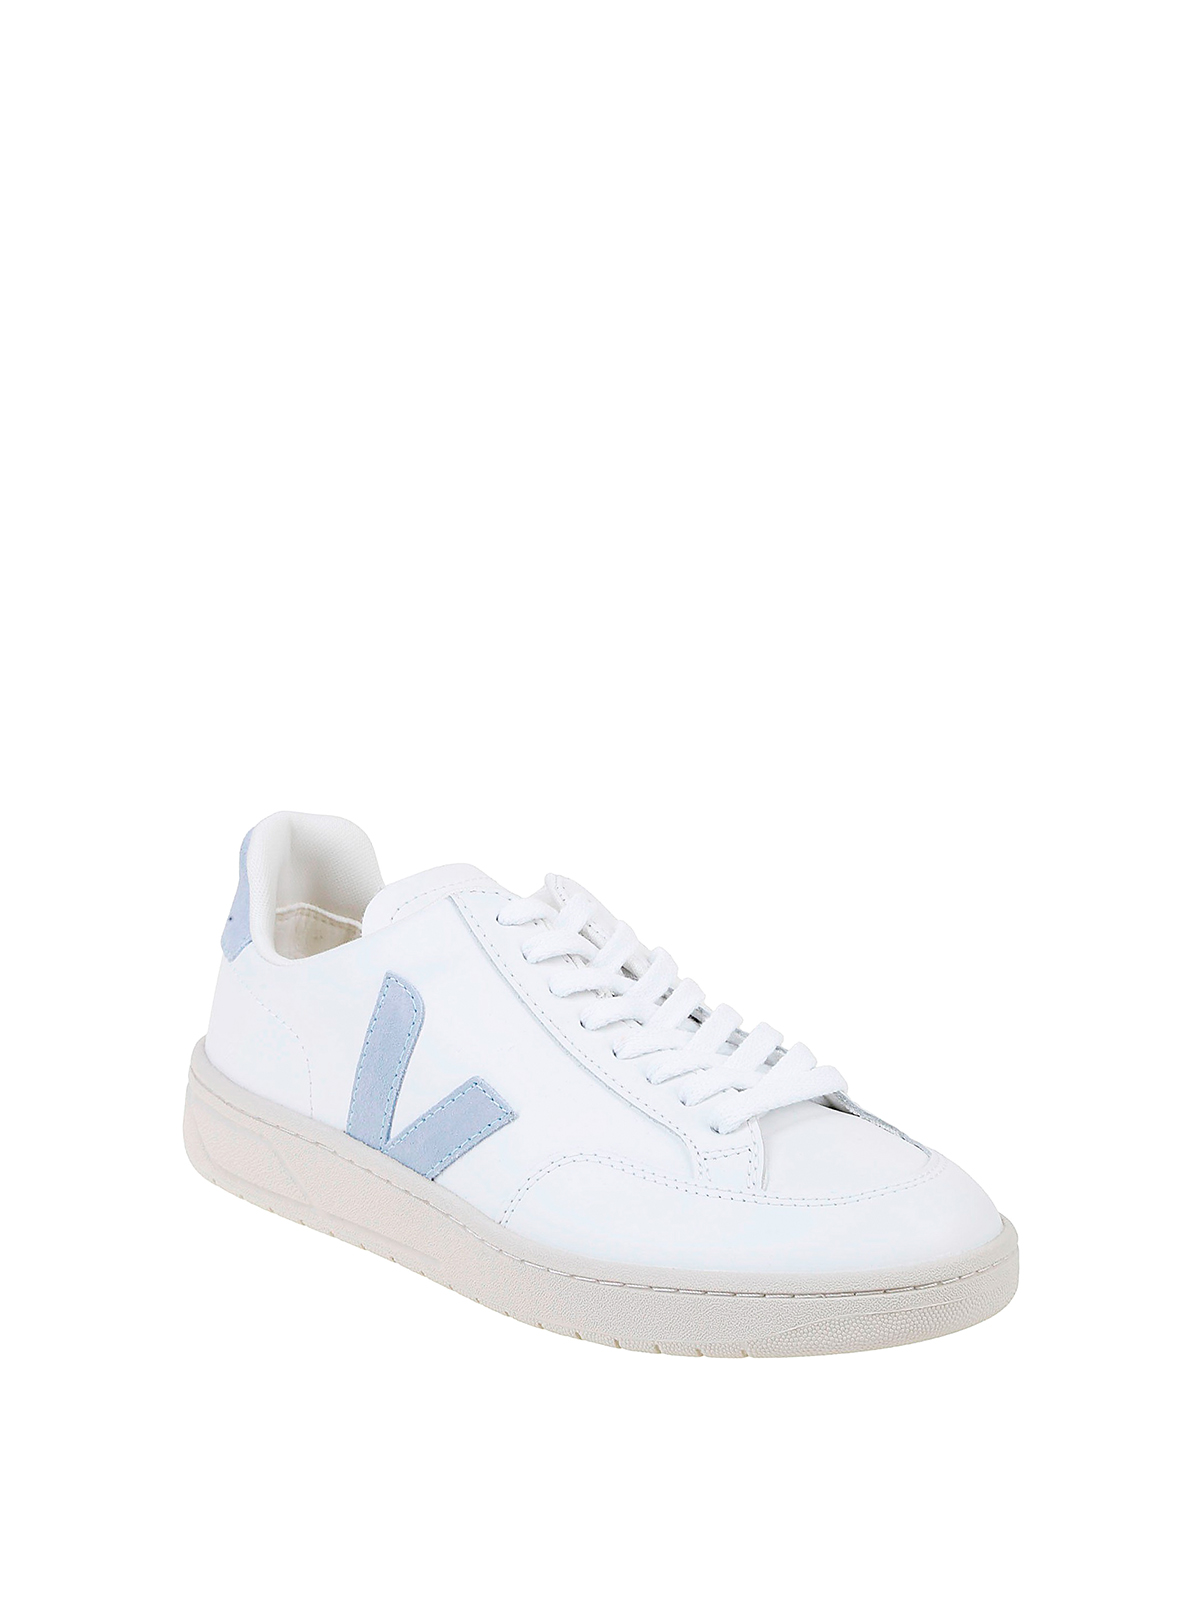 accesorios Disgusto Médico Trainers Veja - V-12 sneakers - XD0202787A | Shop online at THEBS [iKRIX]